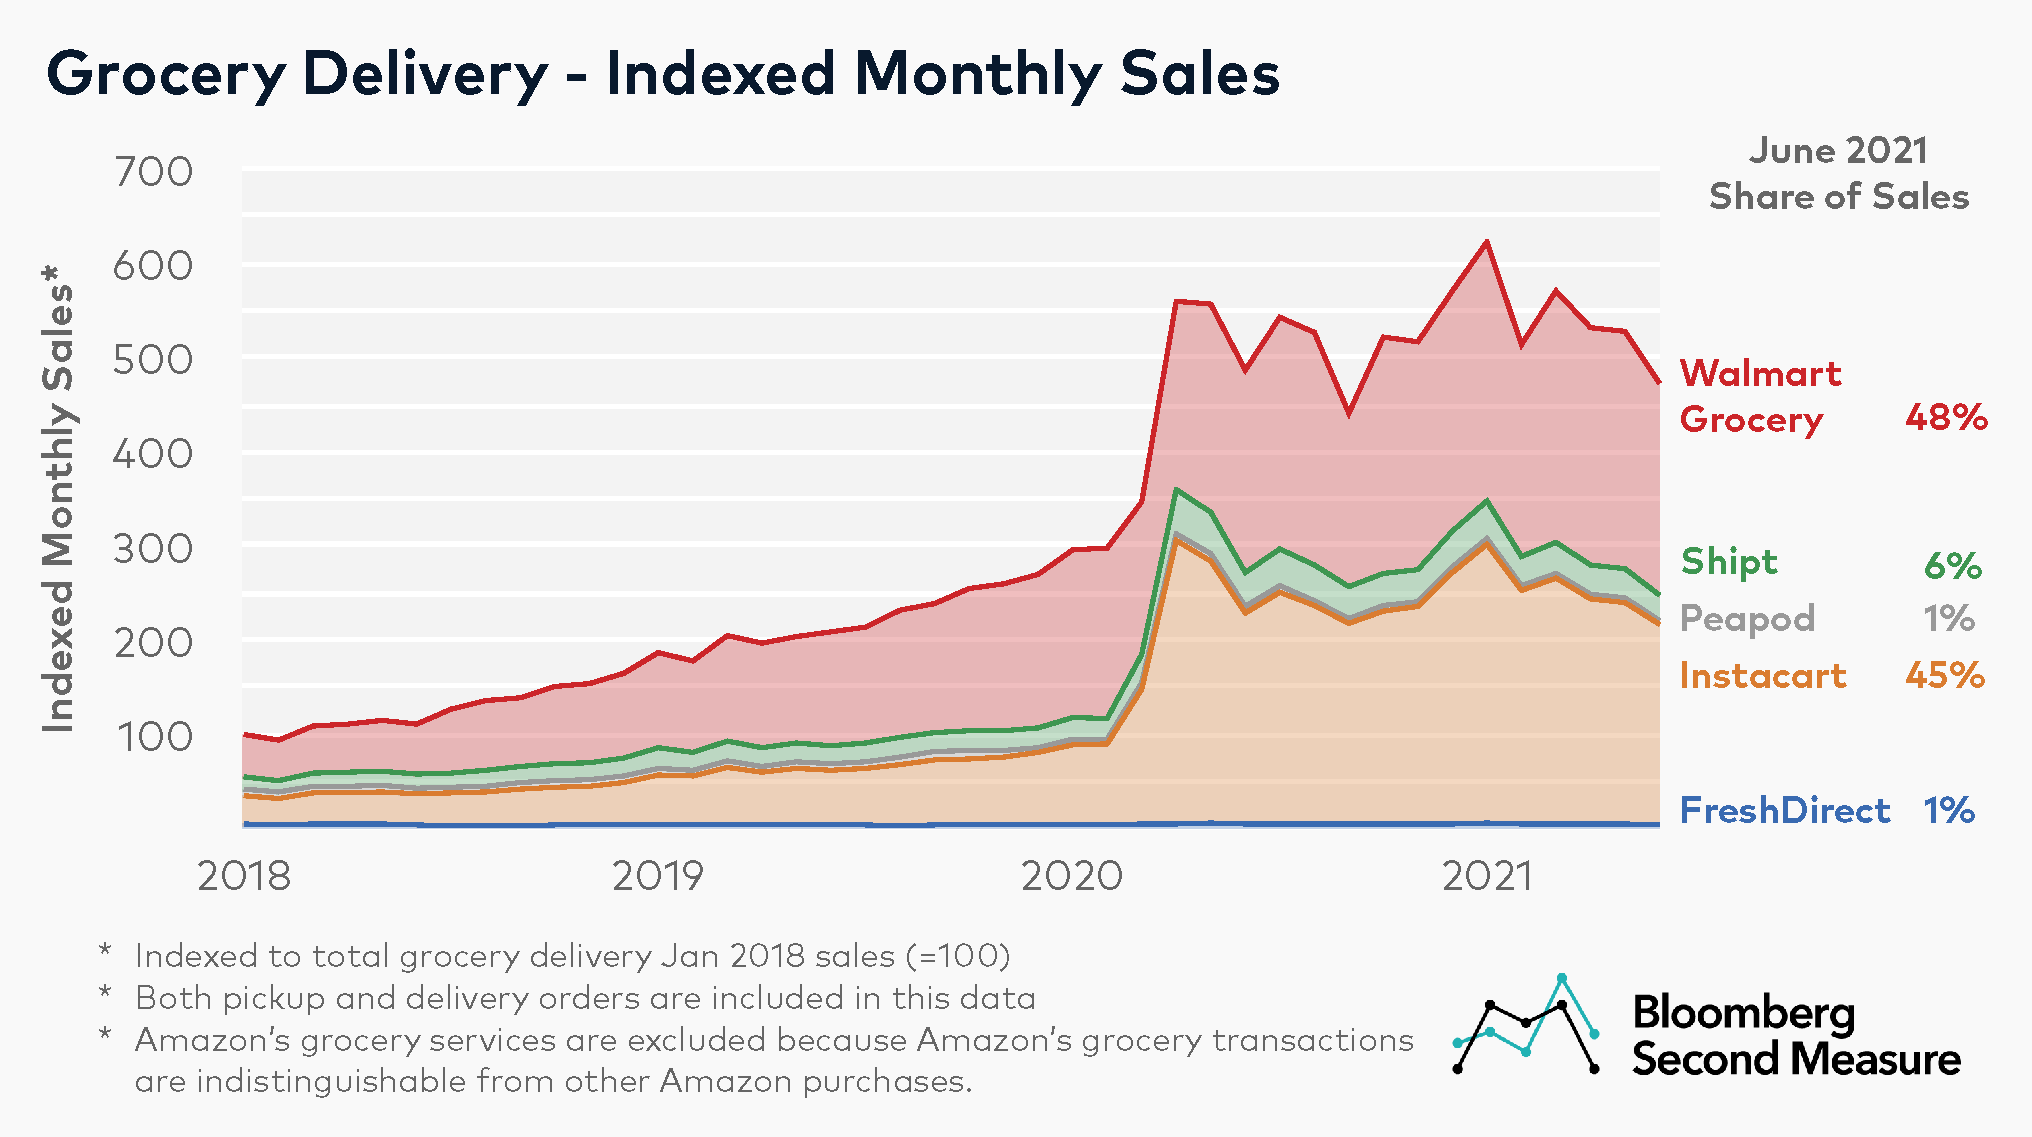 https://secondmeasure.com/wp-content/uploads/2021/07/1-Grocery-delivery-sales-among-competitors-Instacart-Walmart-Grocery-Shipt-Peapod-and-FreshDirect.png